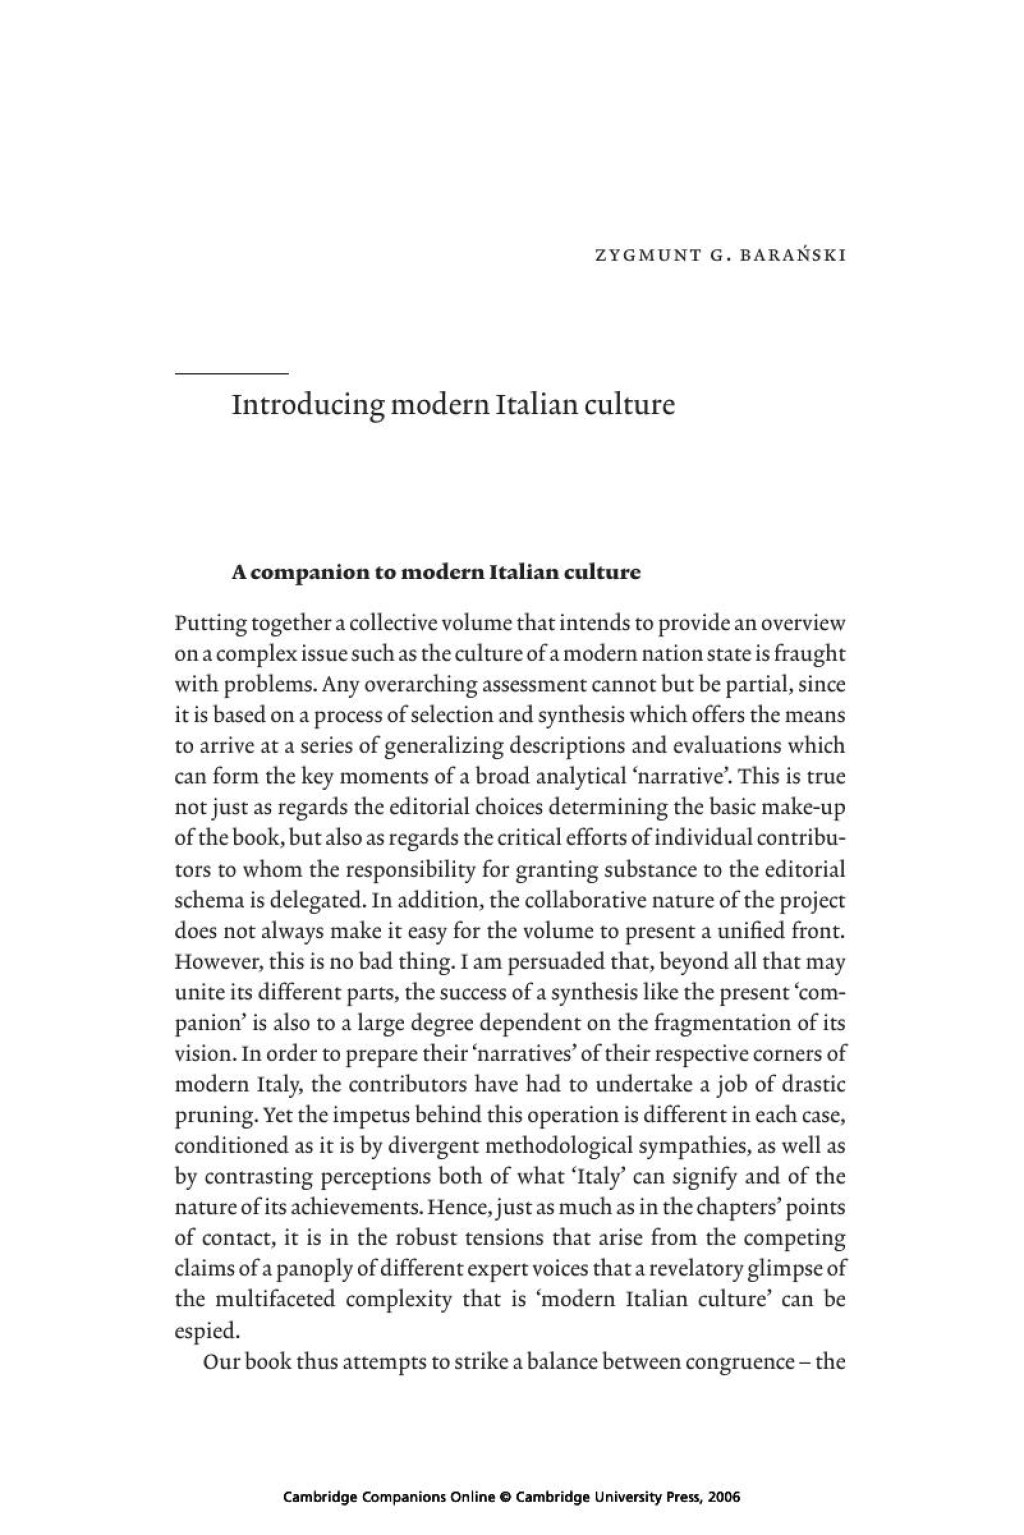 Picture of: Introducing modern Italian culture – The Cambridge Companion to